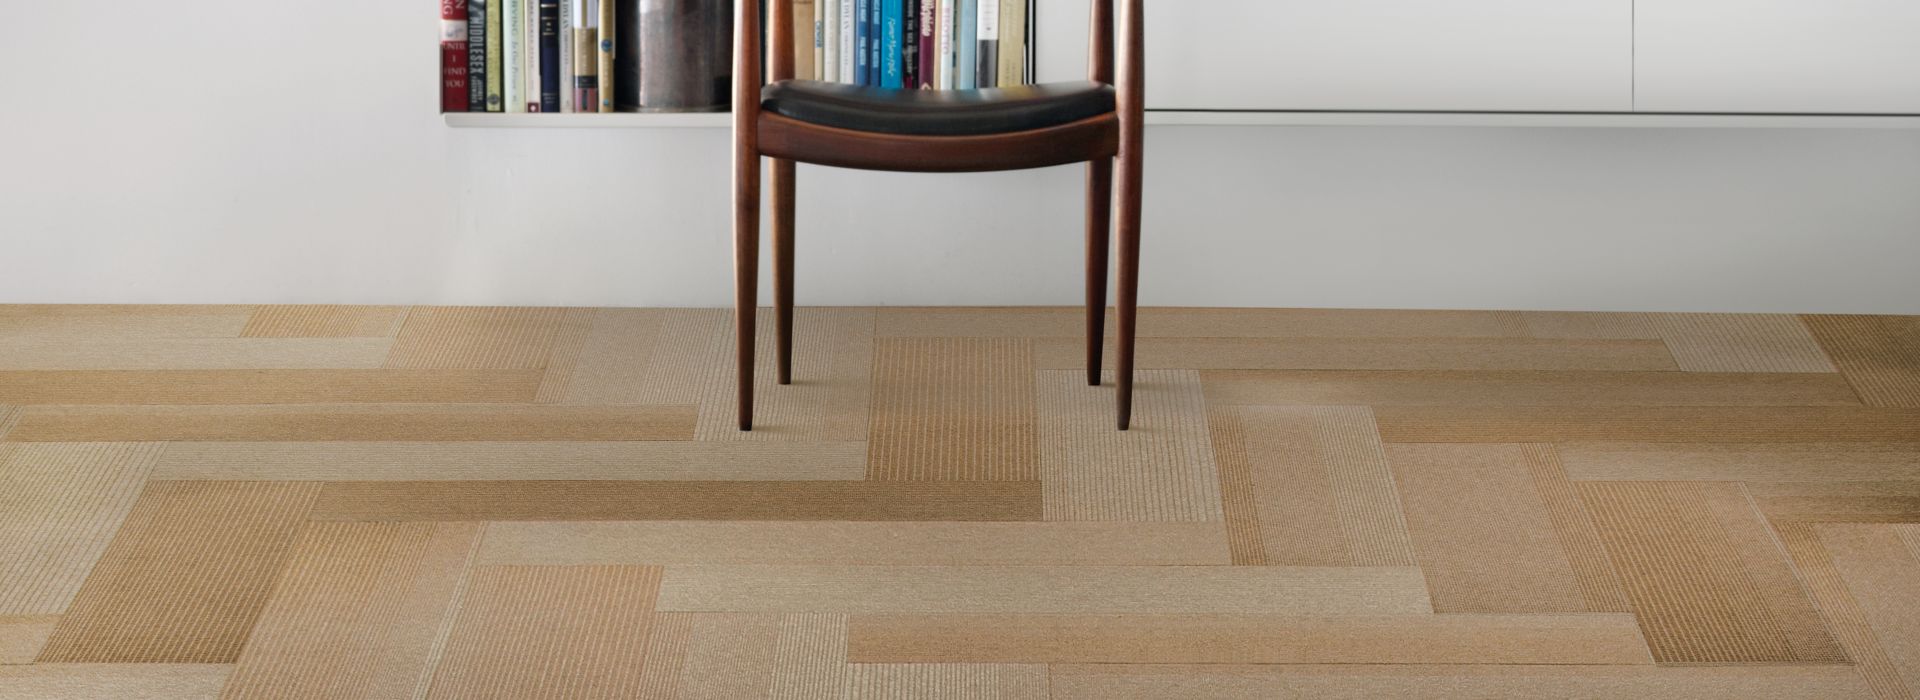 Interface B701 plank carpet tile in front of bookcase with wood chair